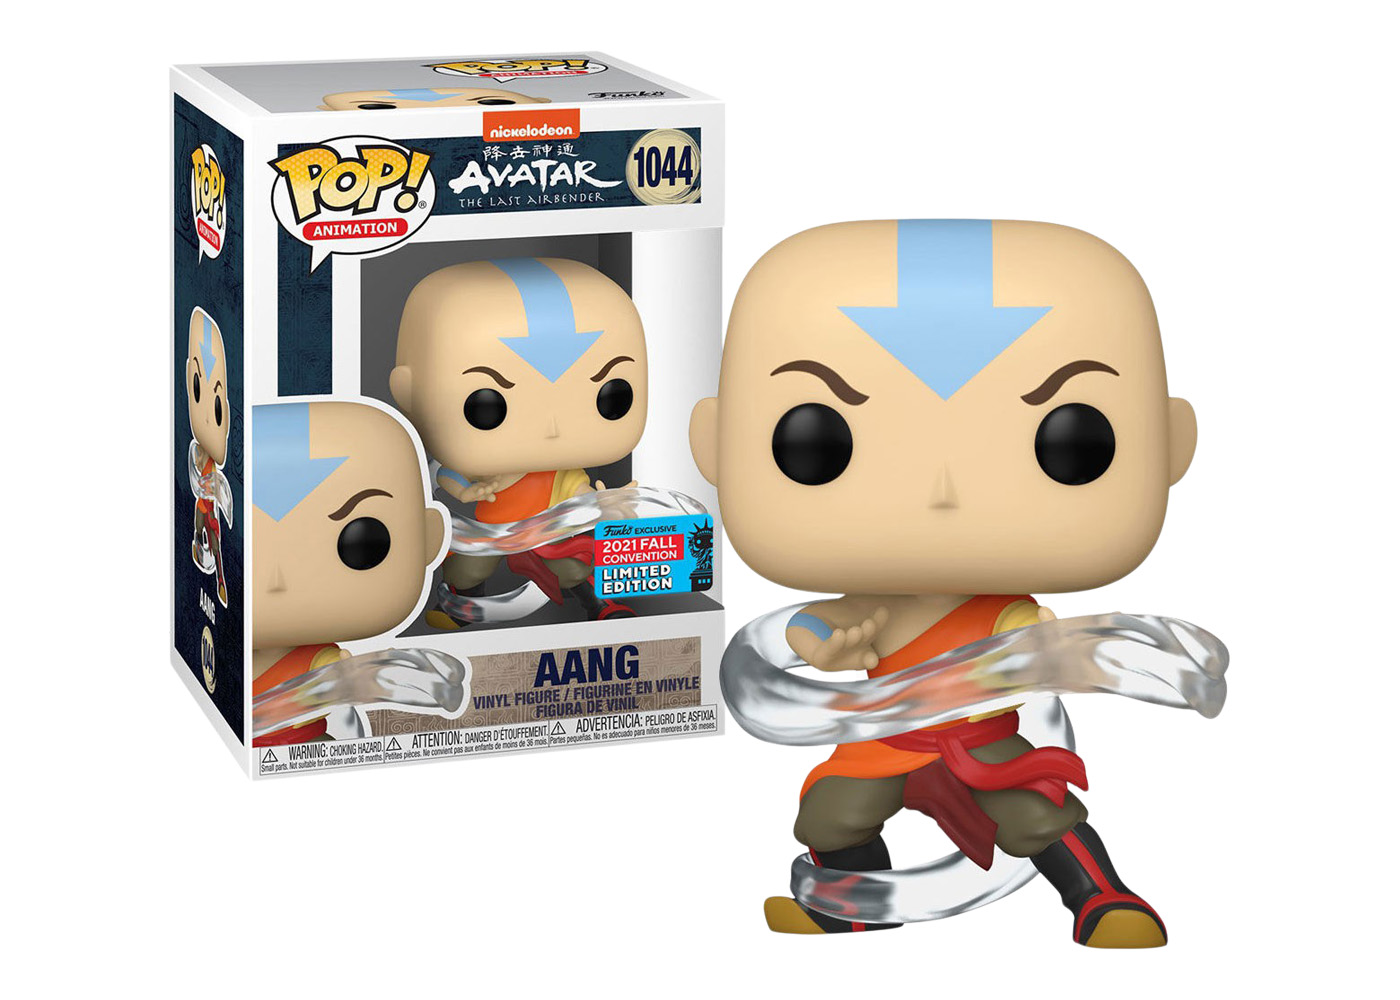 Funko Pop! Animation The Last Airbender Aang 1044 Fall Convention 